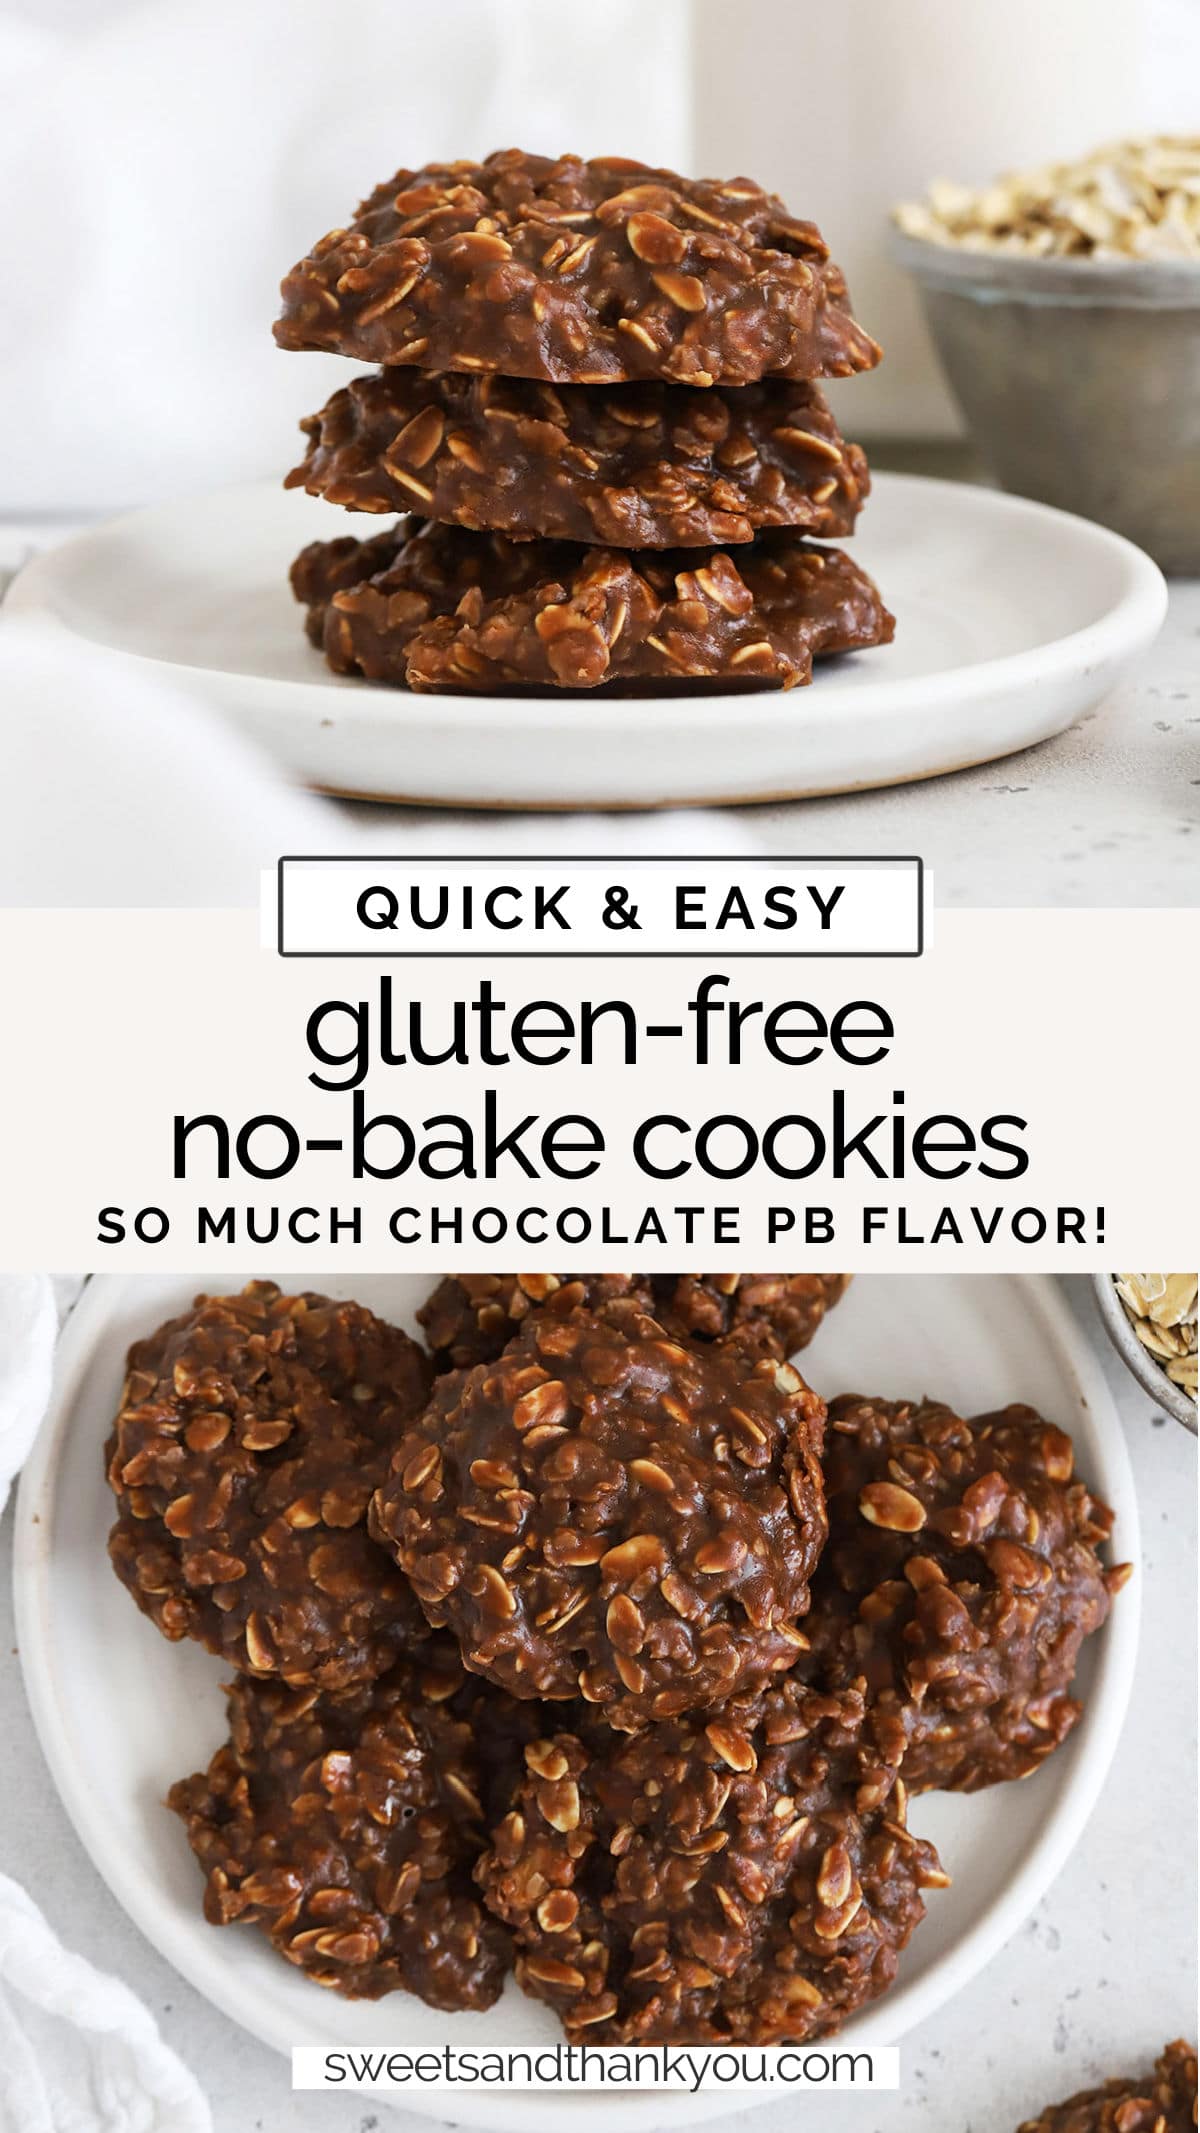 Gluten-Free No-Bake Cookies - These gluten-free chocolate peanut butter no-bake cookies have all the flavor you love, simply made gluten-free! // Gluten Free No Bakes // Gluten Free No bake Cookie recipe // gluten free no bake dessert // easy gluten-free desserts // easy gluten-free cookies // flourless gluten free cookies // gluten free cookies without eggs // gluten free cookie recipes // chocolate peanut butter no bake cookie recipe // gluten-free chocolate peanut butter cookies